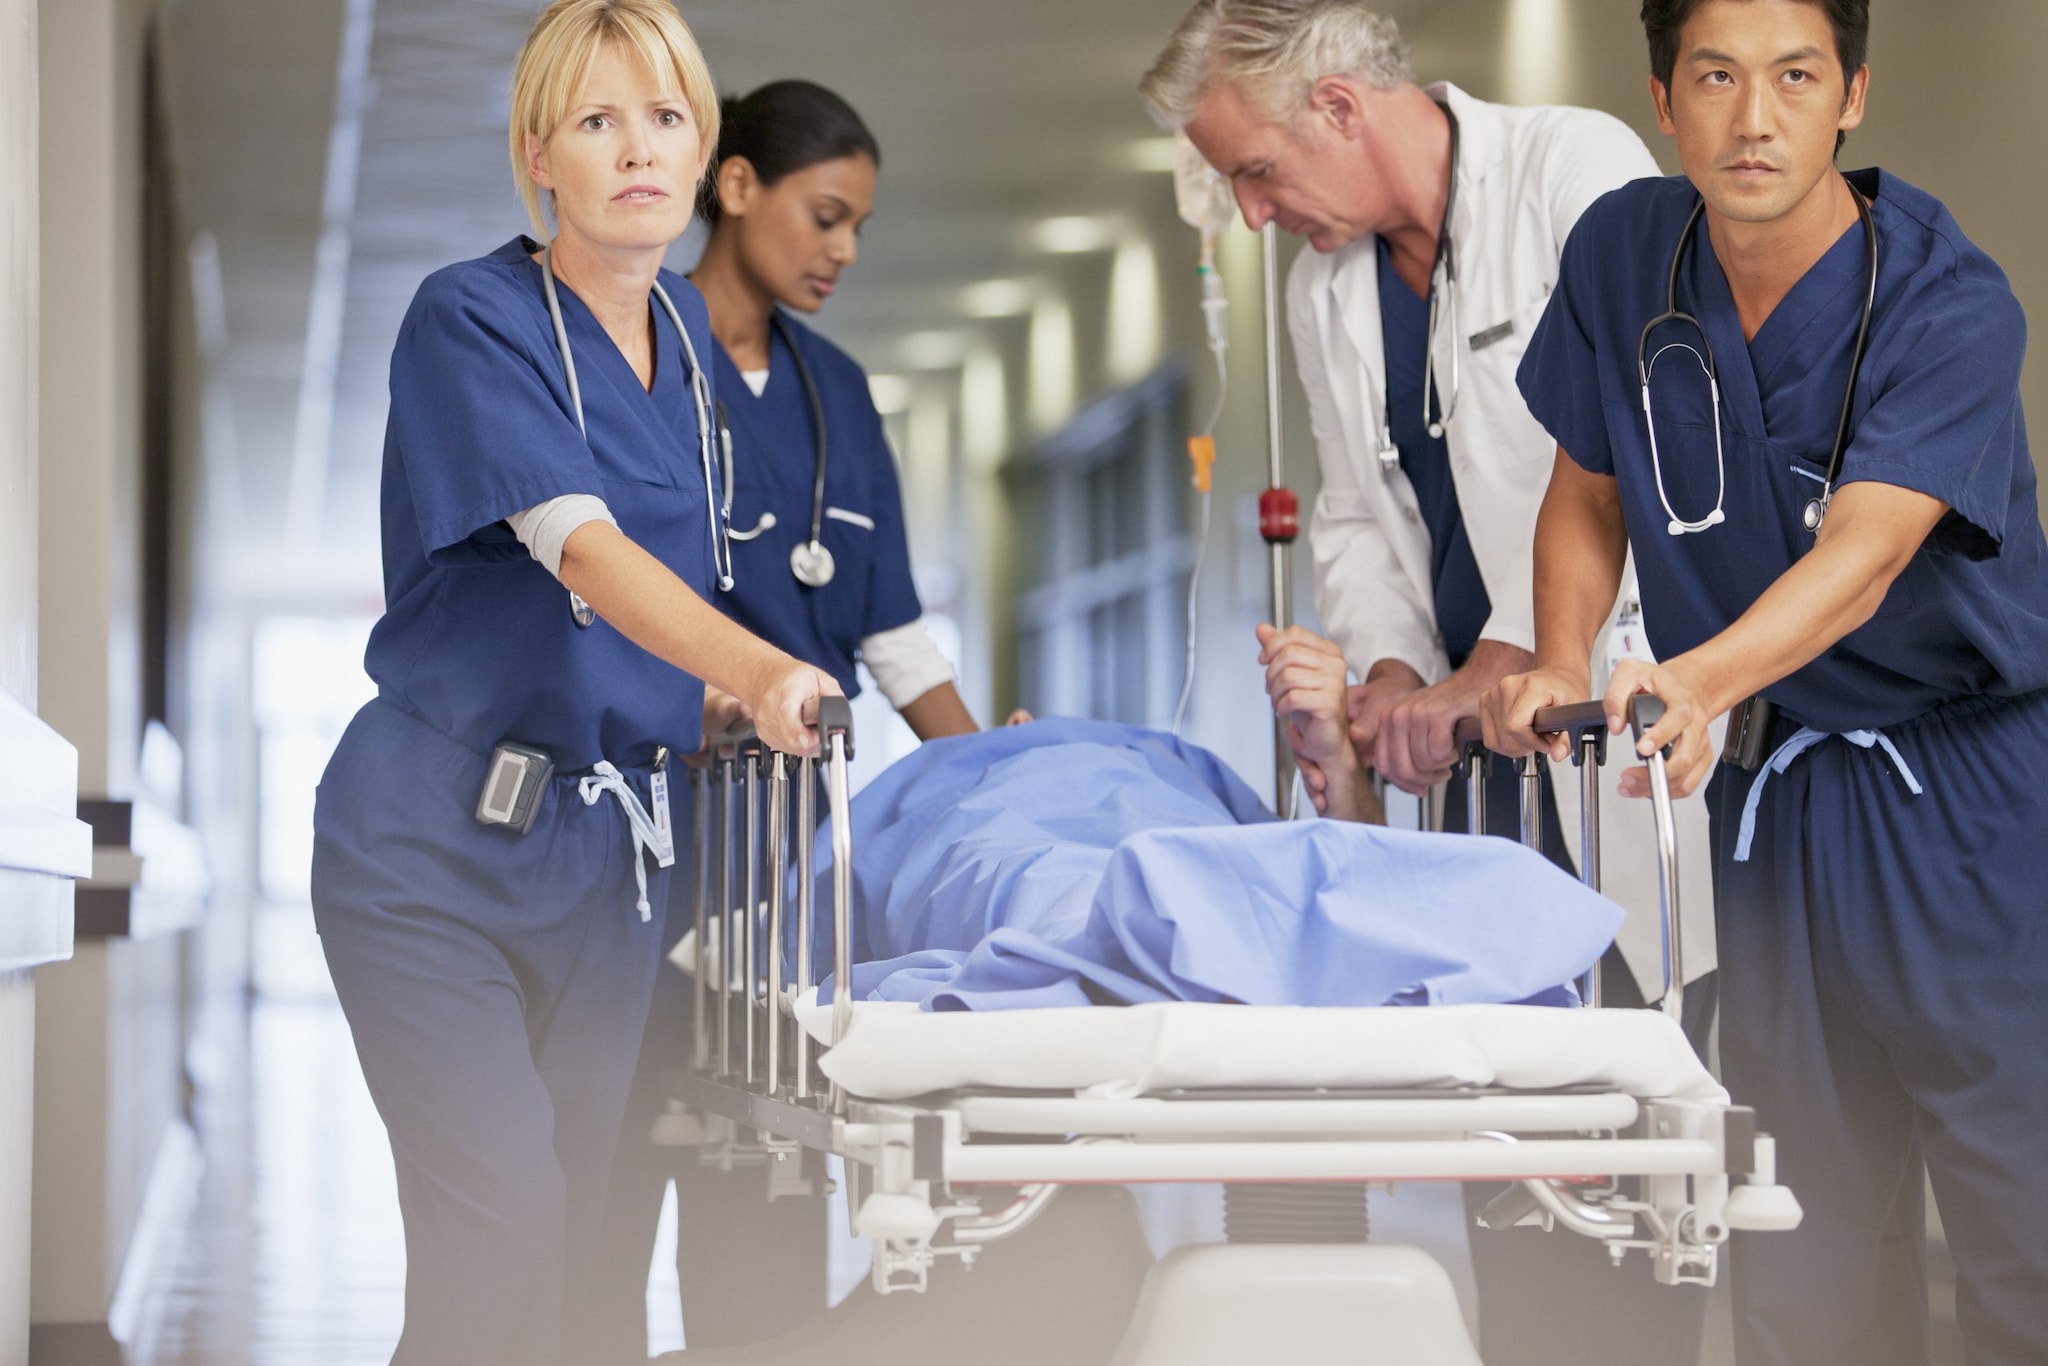 A four-person healthcare team rolling a patient draped in blue on a gurney through a hospital hallway